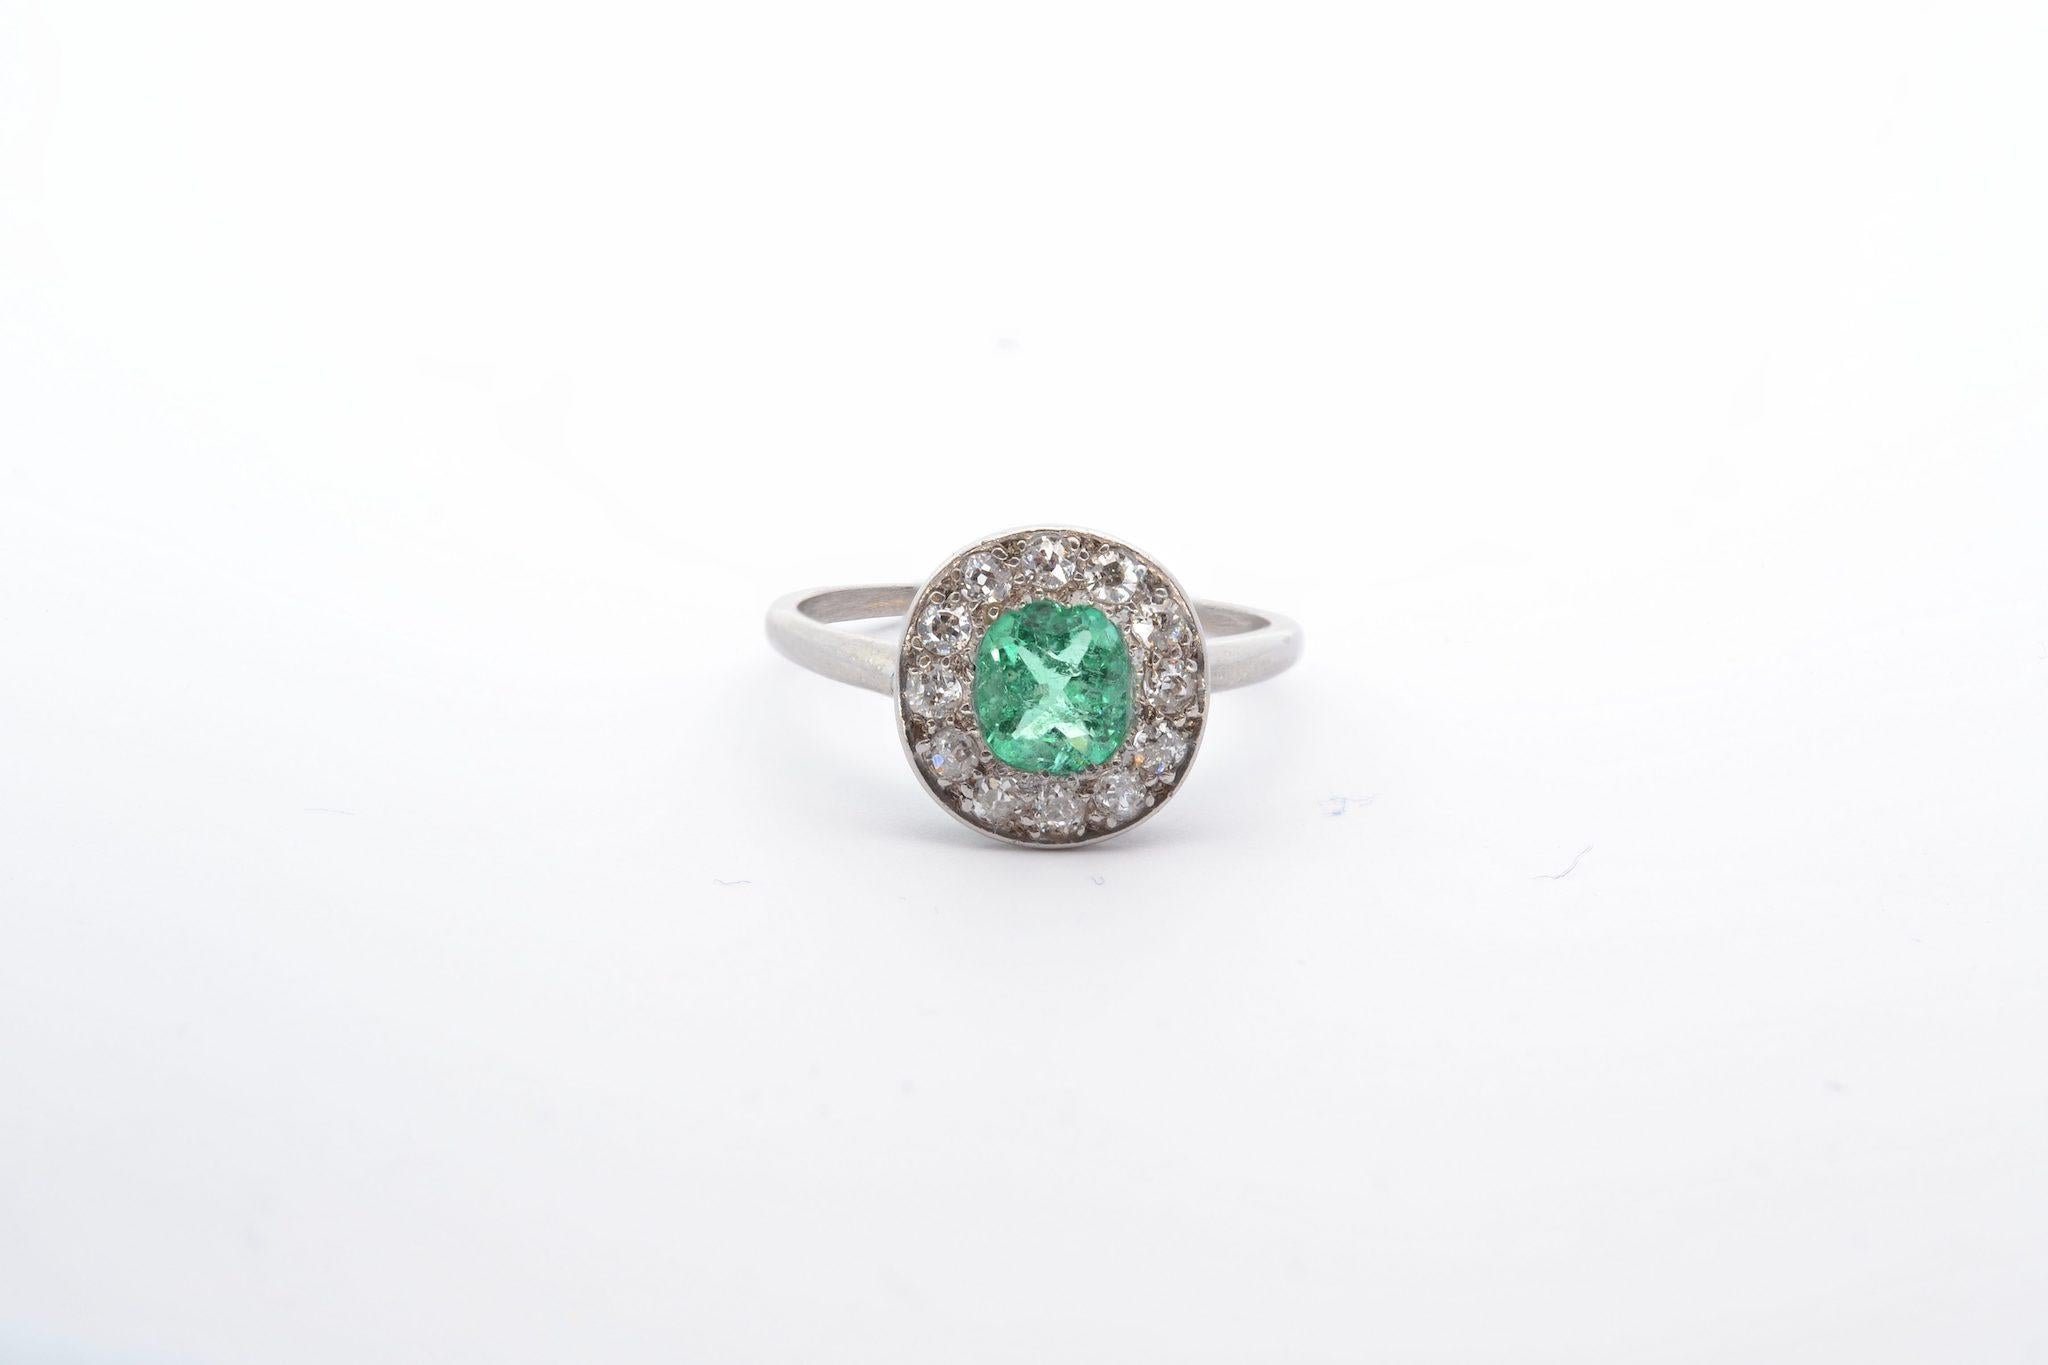 Stones: 1 carat emerald and 12 diamonds: 0.44ct
Material: Platinum
Dimensions: Diameter of 12mm
Weight: 4.1g
Period: 1920
Size: 60 (free sizing)
Certificate
Ref. : 25077